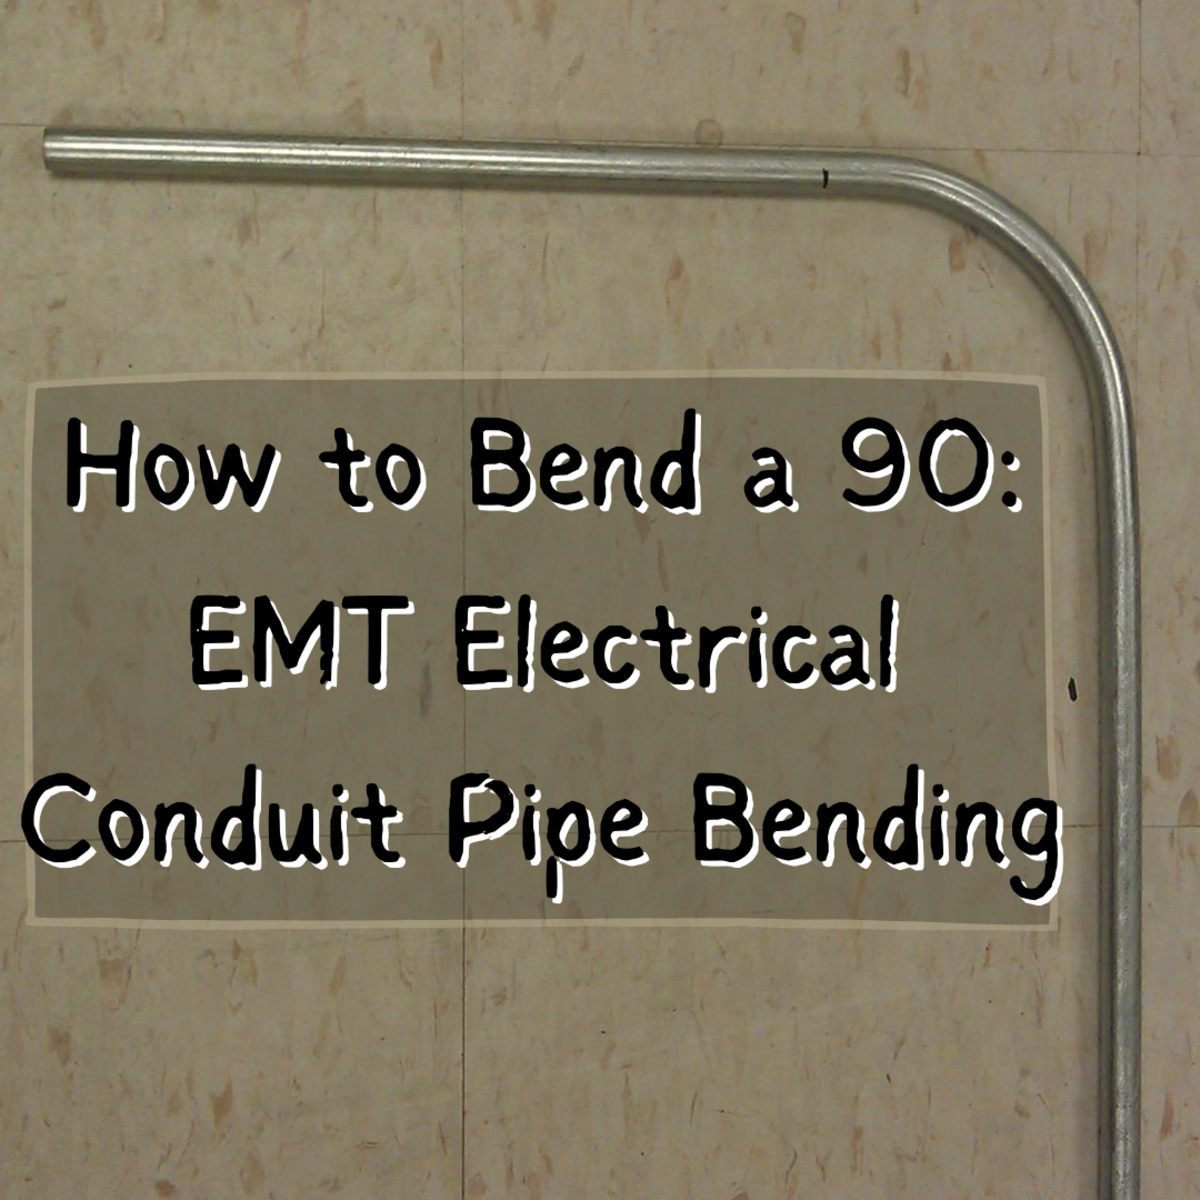 Read on to learn how to bend a 90 with EMT electrical conduit pipe. You'll also learn how to bend a kick 90 and a double 45-degree 90.